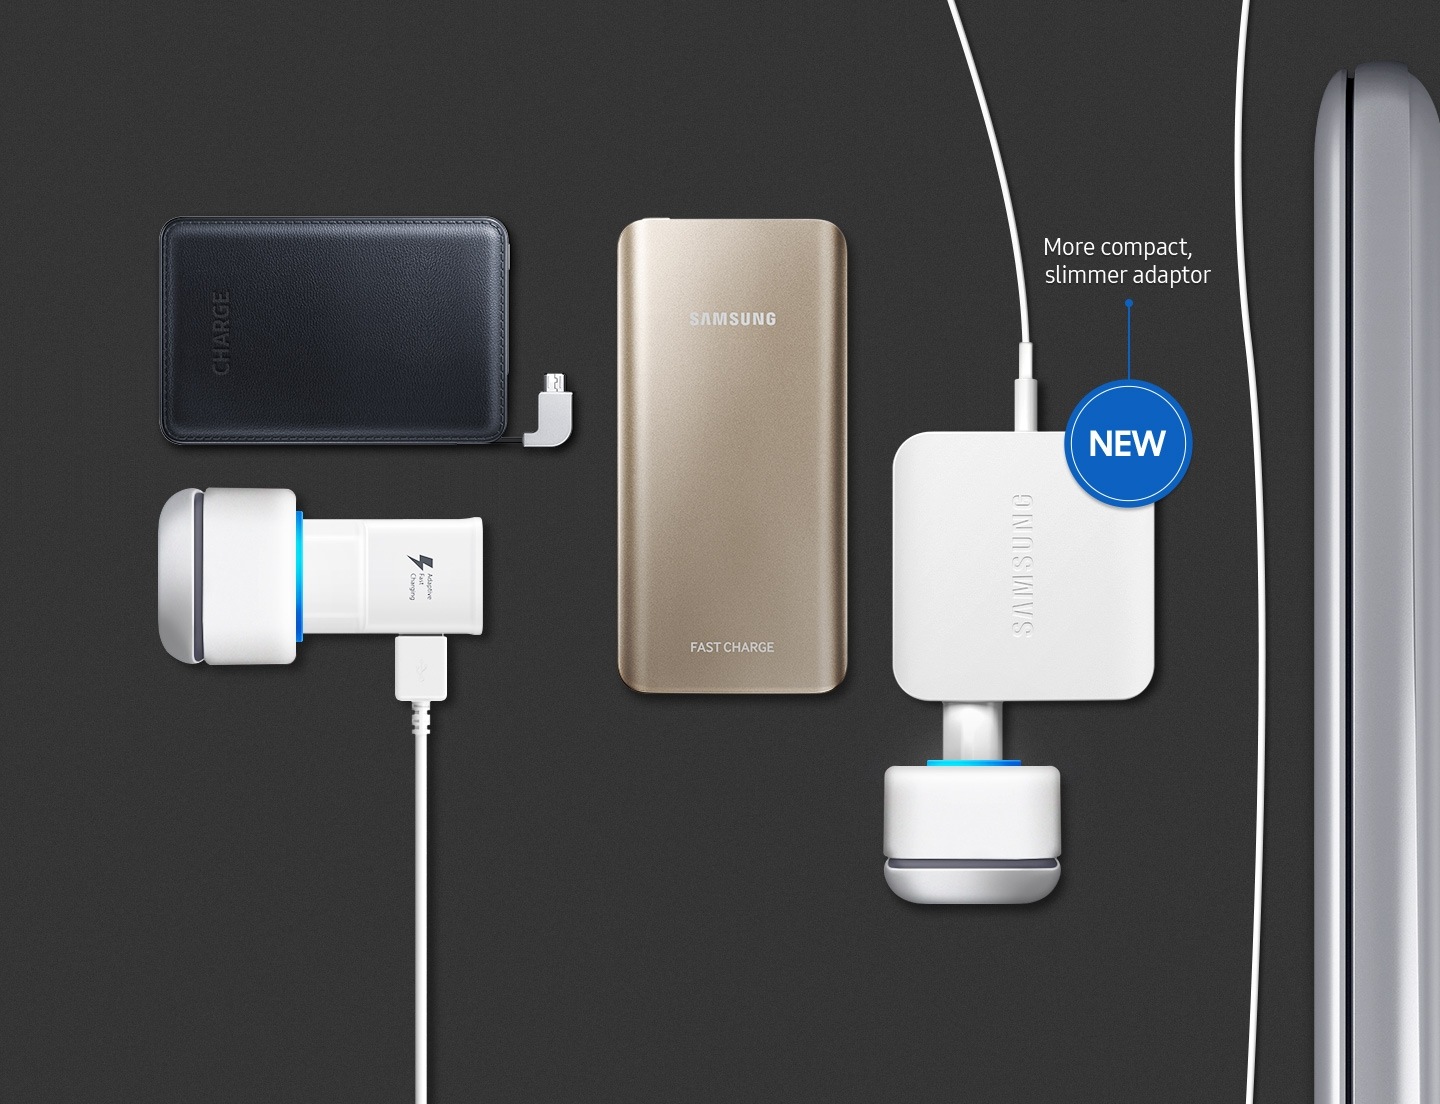 An image showing the Notebook 9’s side and a charging cable connected to a multi-outlet adapter, as well as a portable phone battery and charger. An icon that reads “new” visible, with the text― more compact, slimmer adapter.